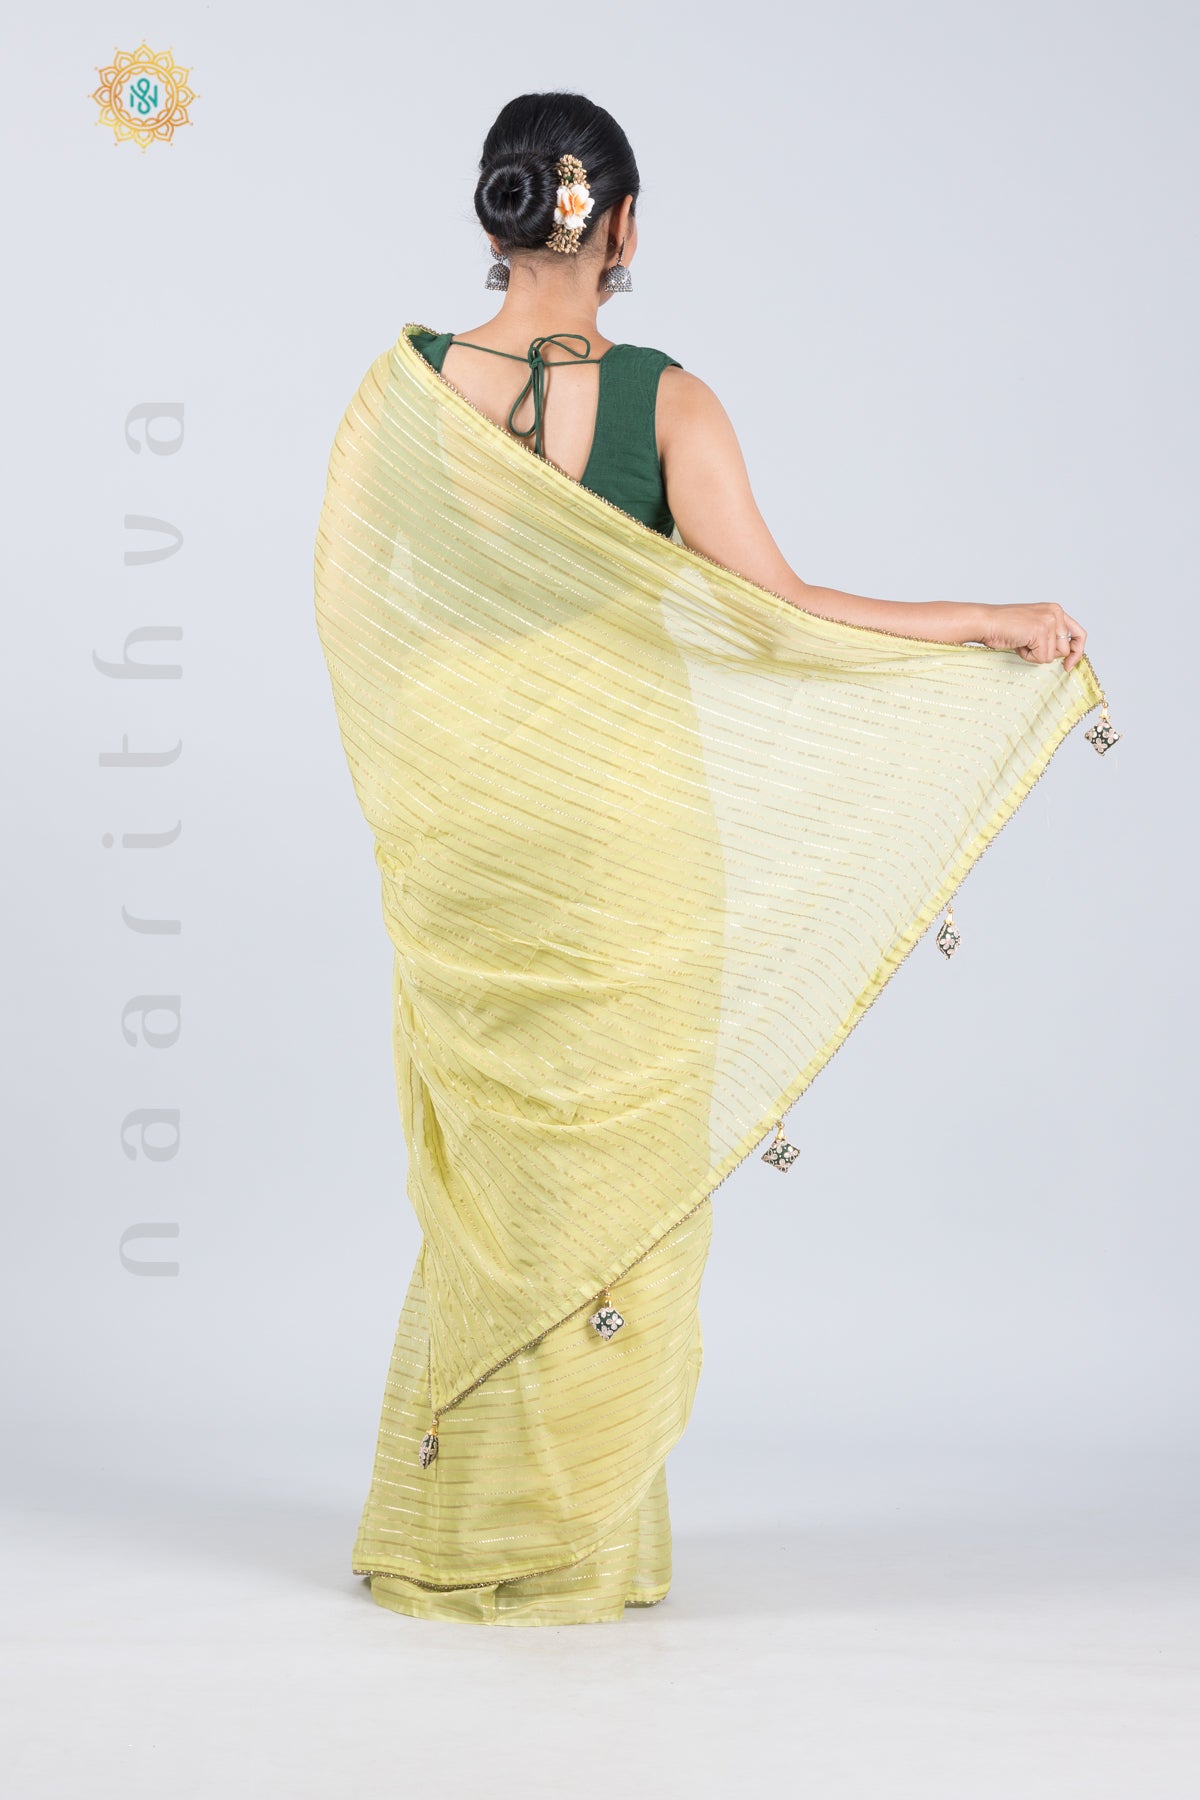 LIME GREEN WITH DARK GREEN - ORGANZA GEORGETTE WITH STRIPES ZARI, PIPE BEADS BORDER & BORCADE BLOUSE